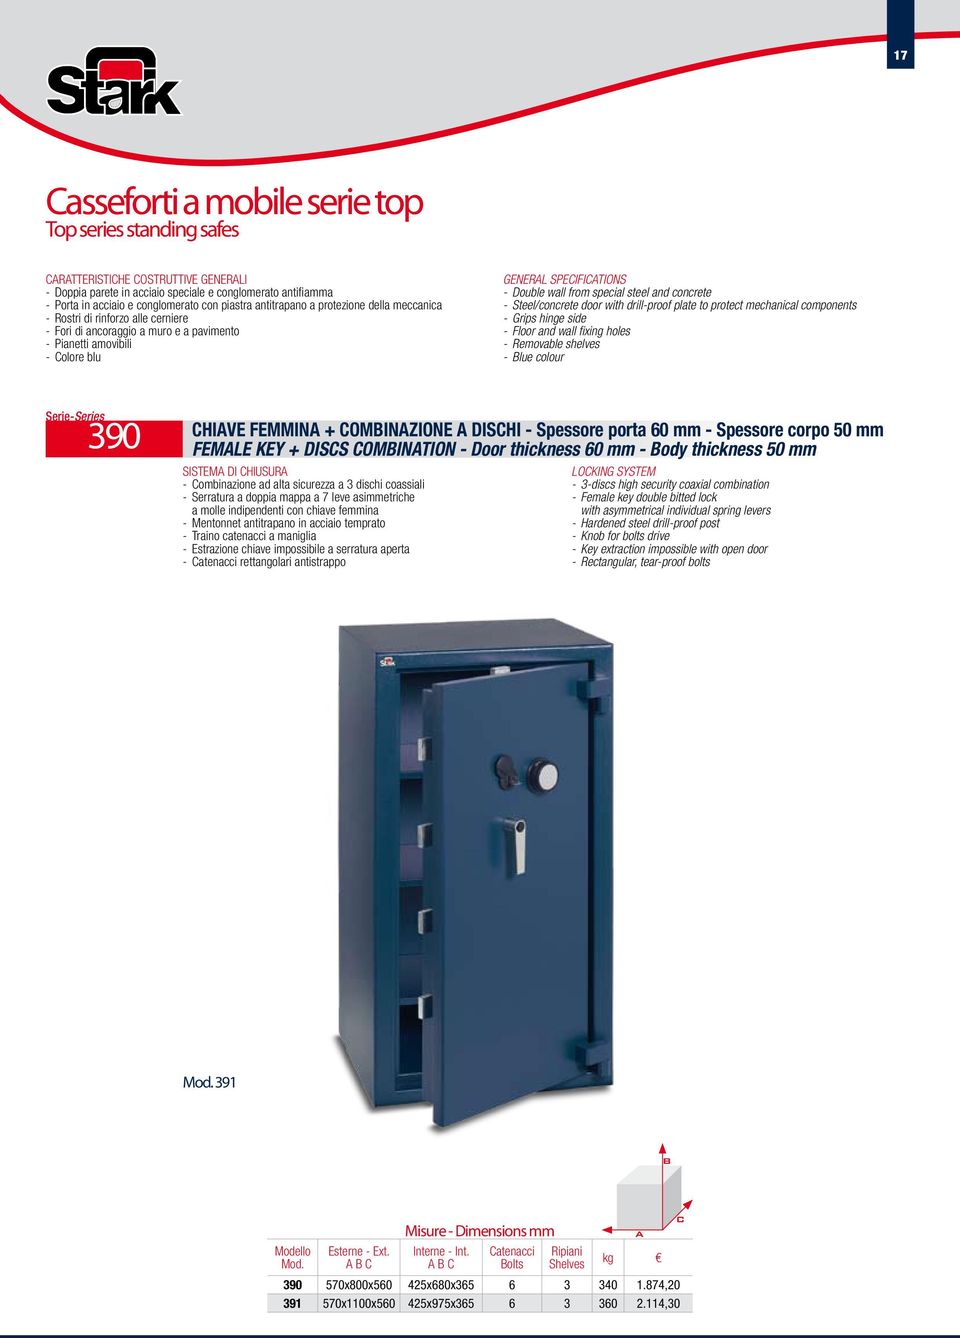 drill-proof plate to protect mechanical components - Grips hinge side - Floor and wall fixing holes - Removable shelves - Blue colour 390 CHIAVE FEMMINA + COMBINAZIONE A DISCHI - Spessore porta 60 mm